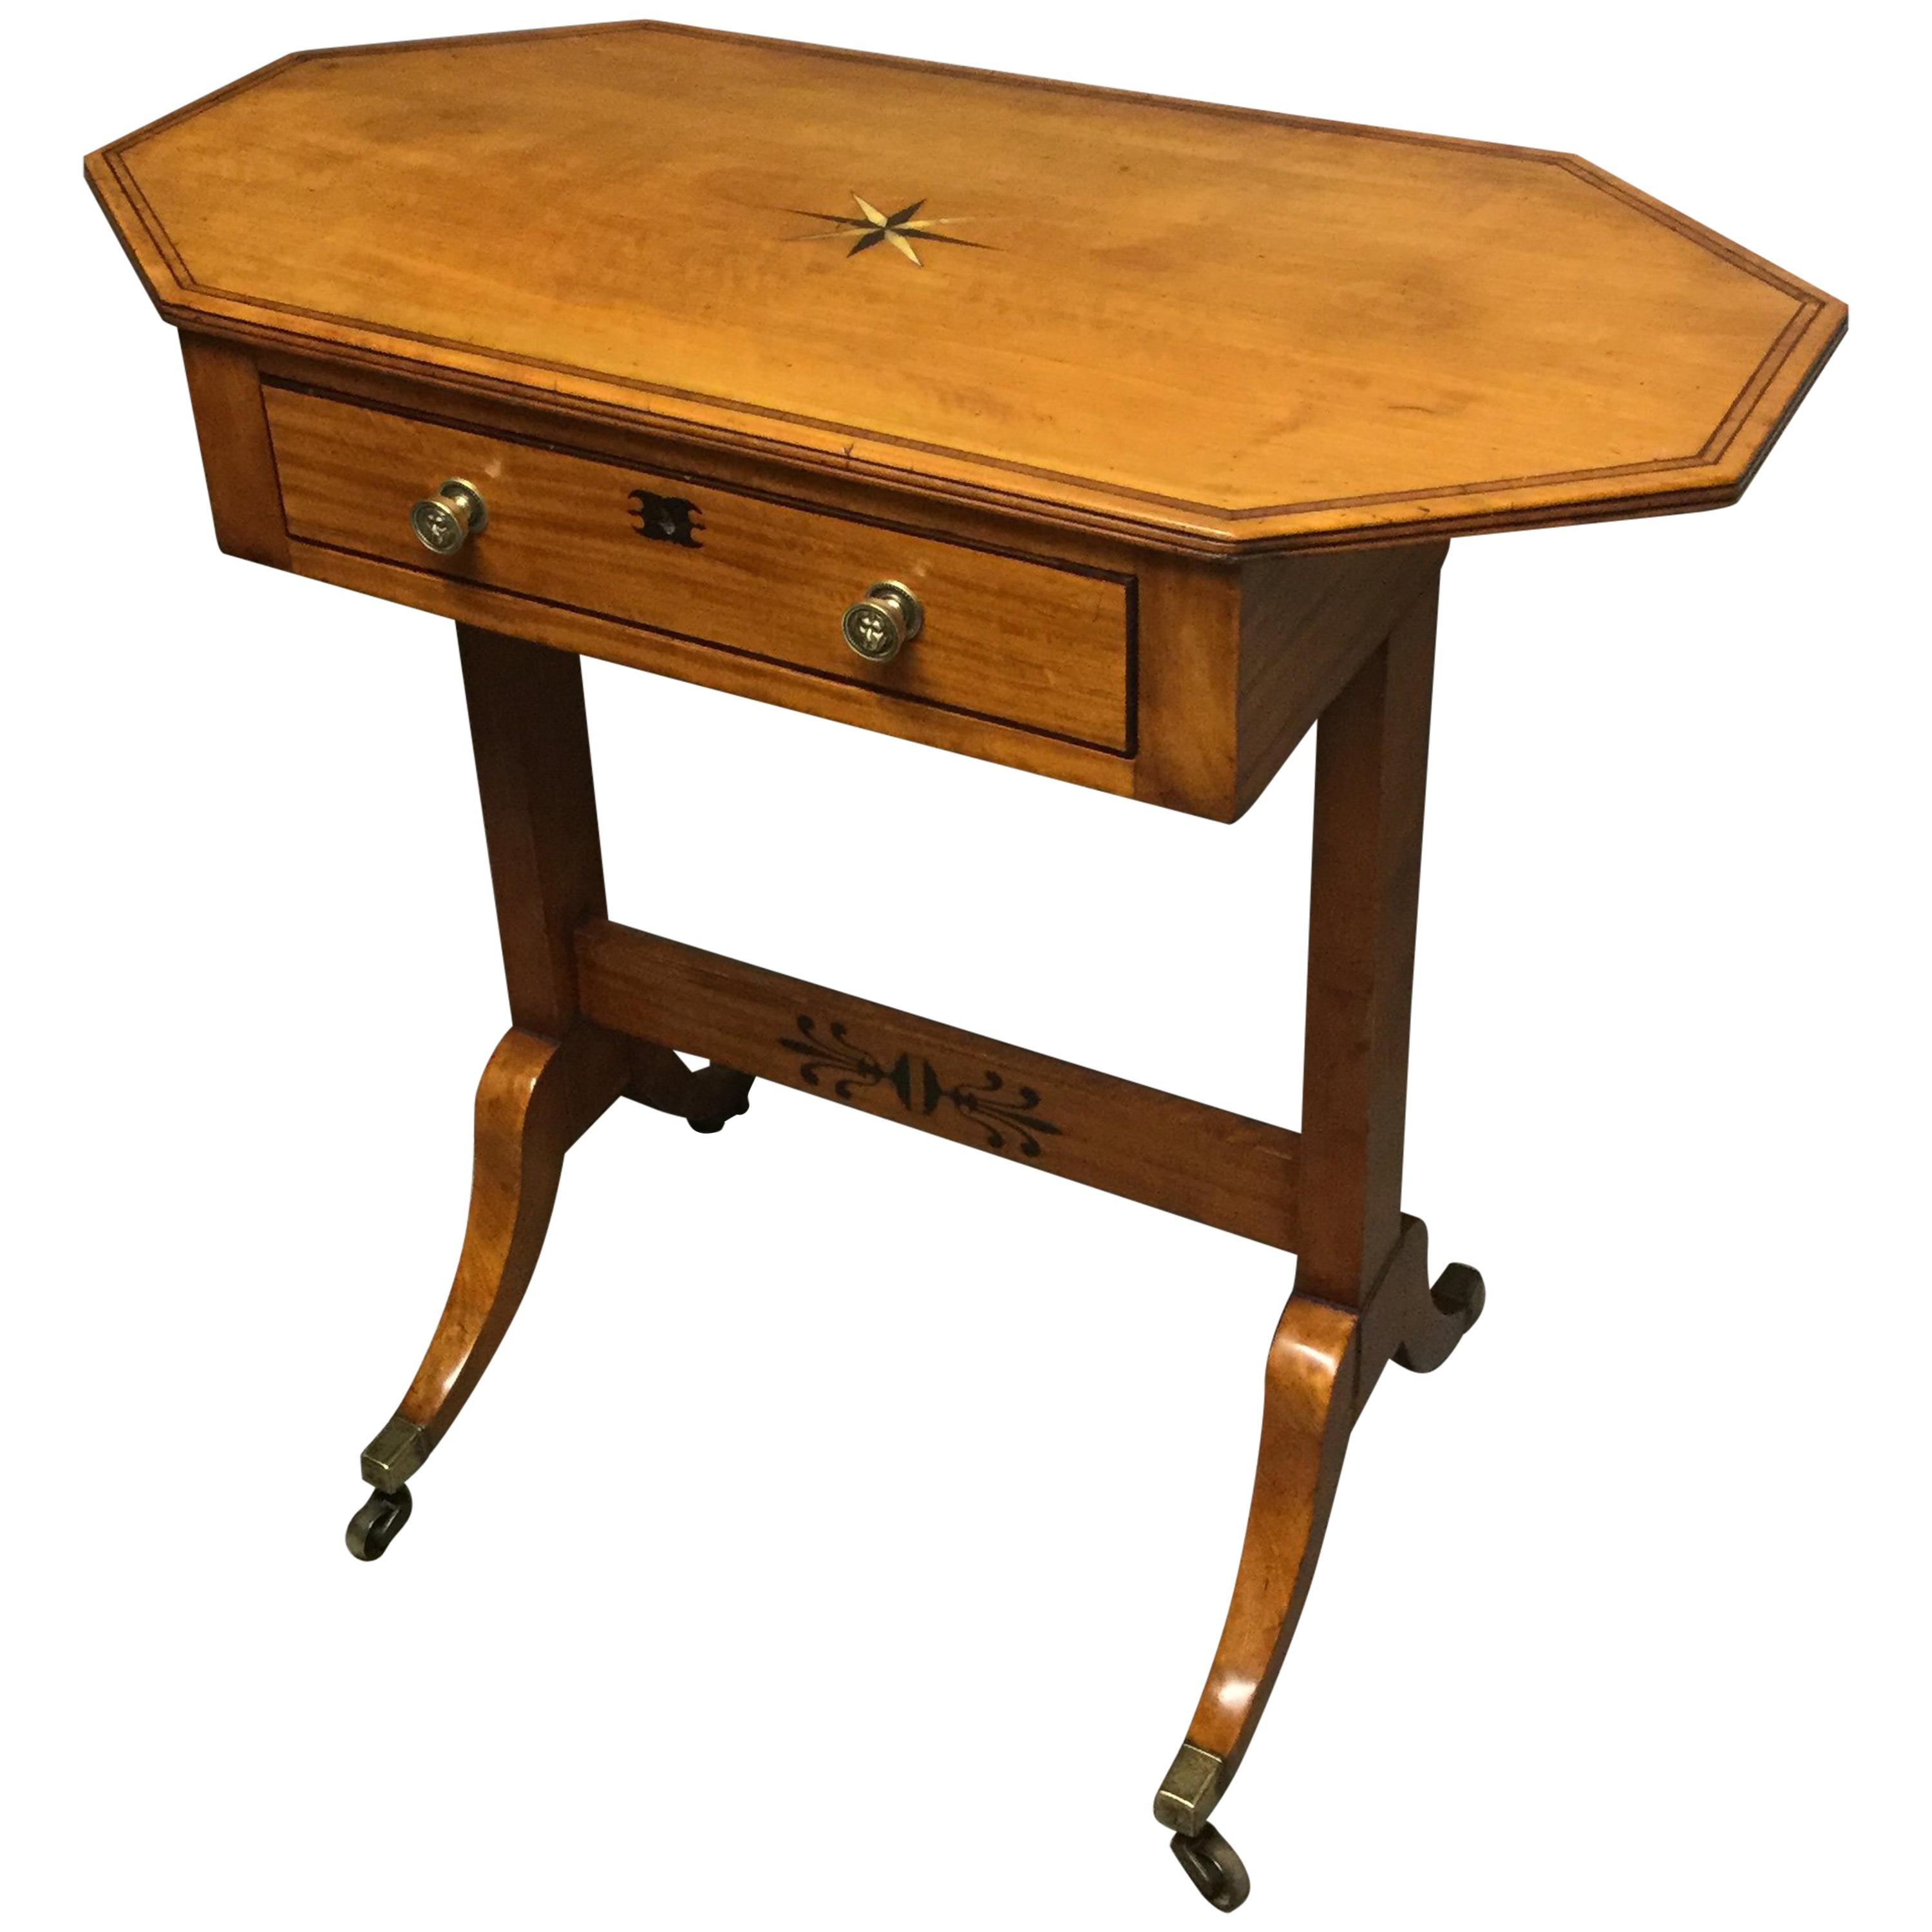 Regency Period Satinwood Inlaid Occasional Table with a Drawer im Angebot